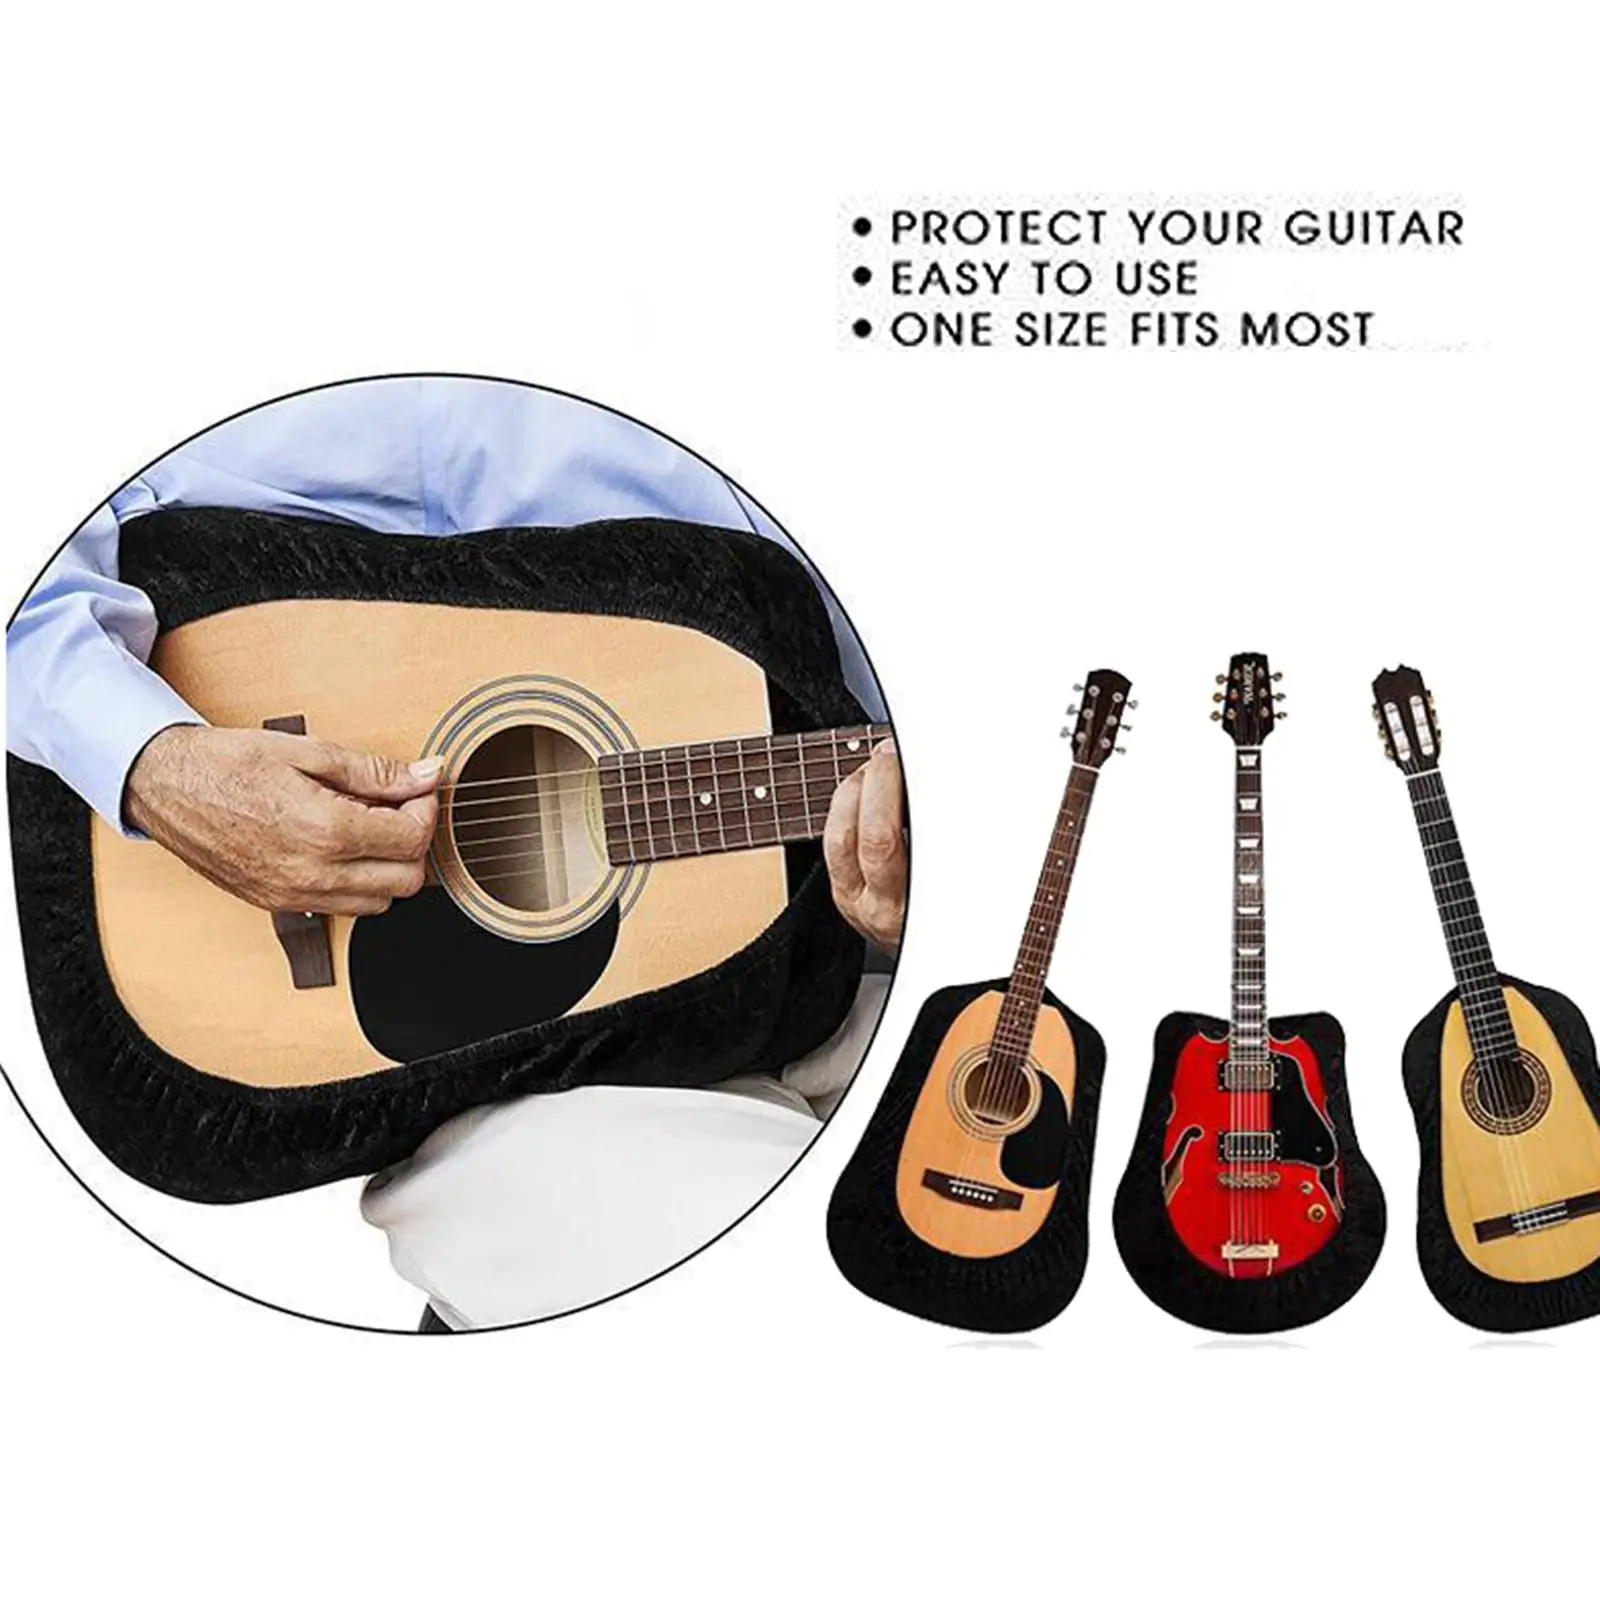 Guitar Cover, Guitar Protector, Guitar Gig Bag, Protective Sleeve for Acoustic,